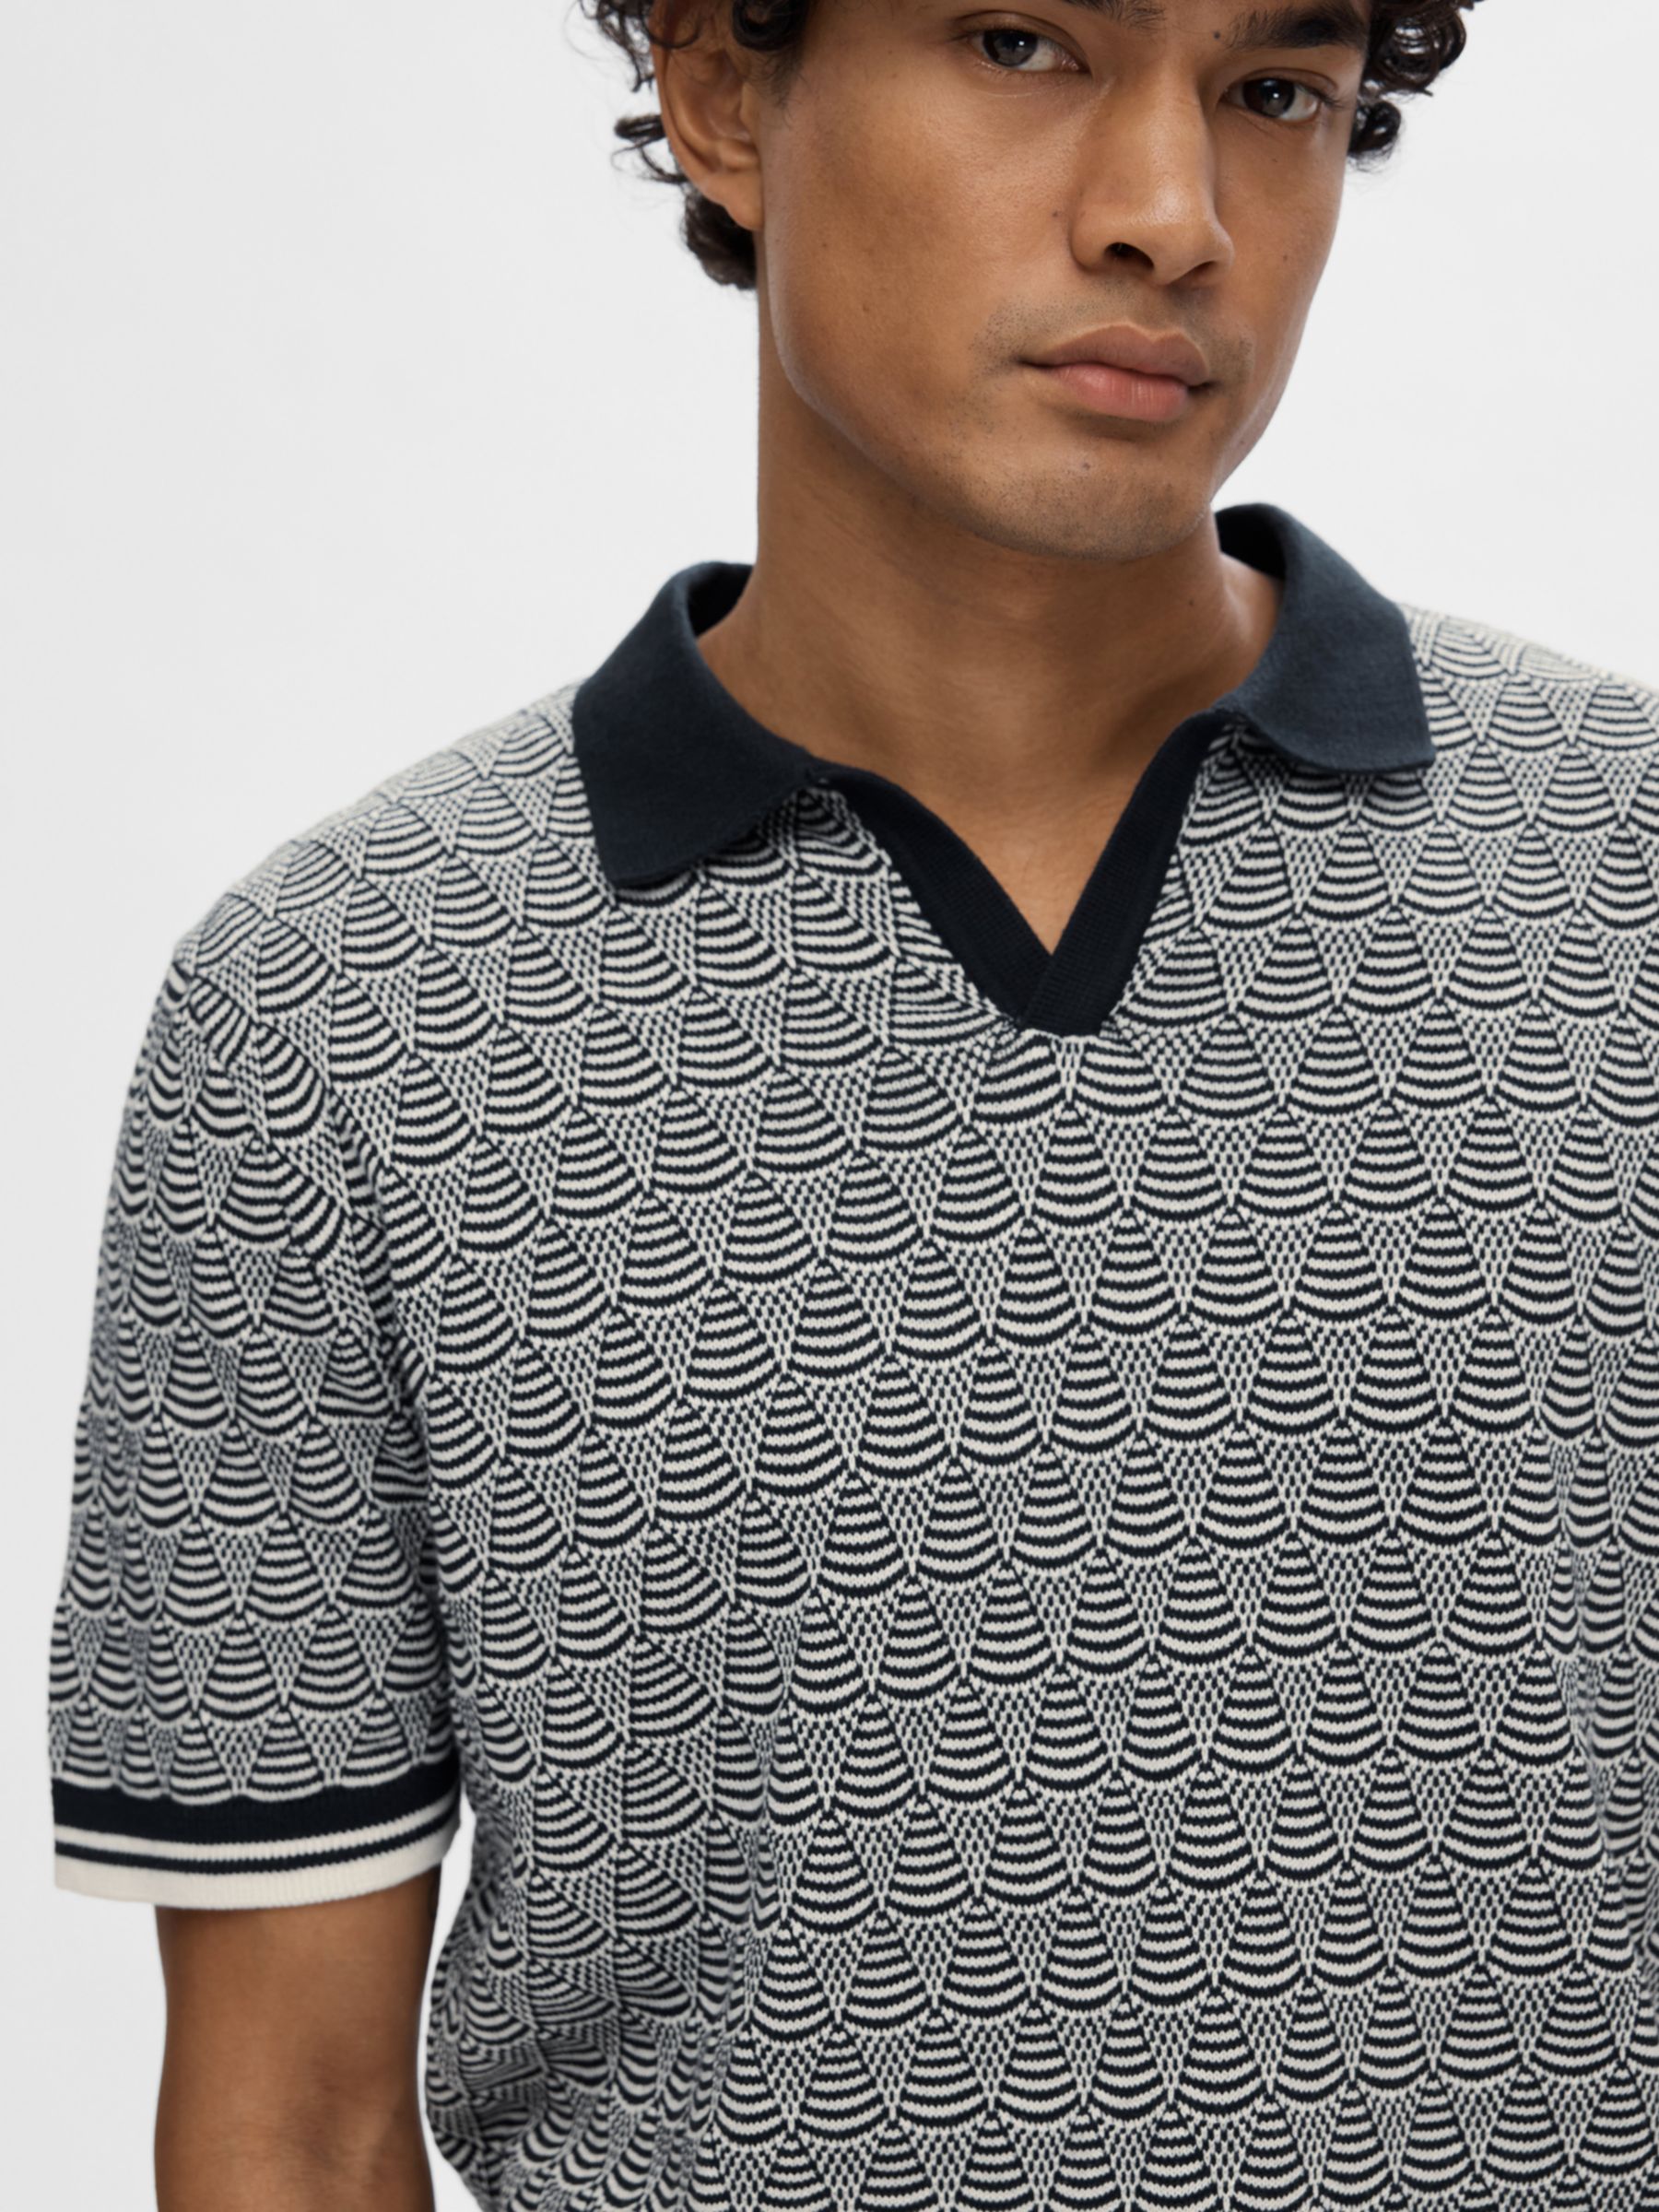 Buy SELECTED HOMME Geometric Knit Polo Shirt Online at johnlewis.com